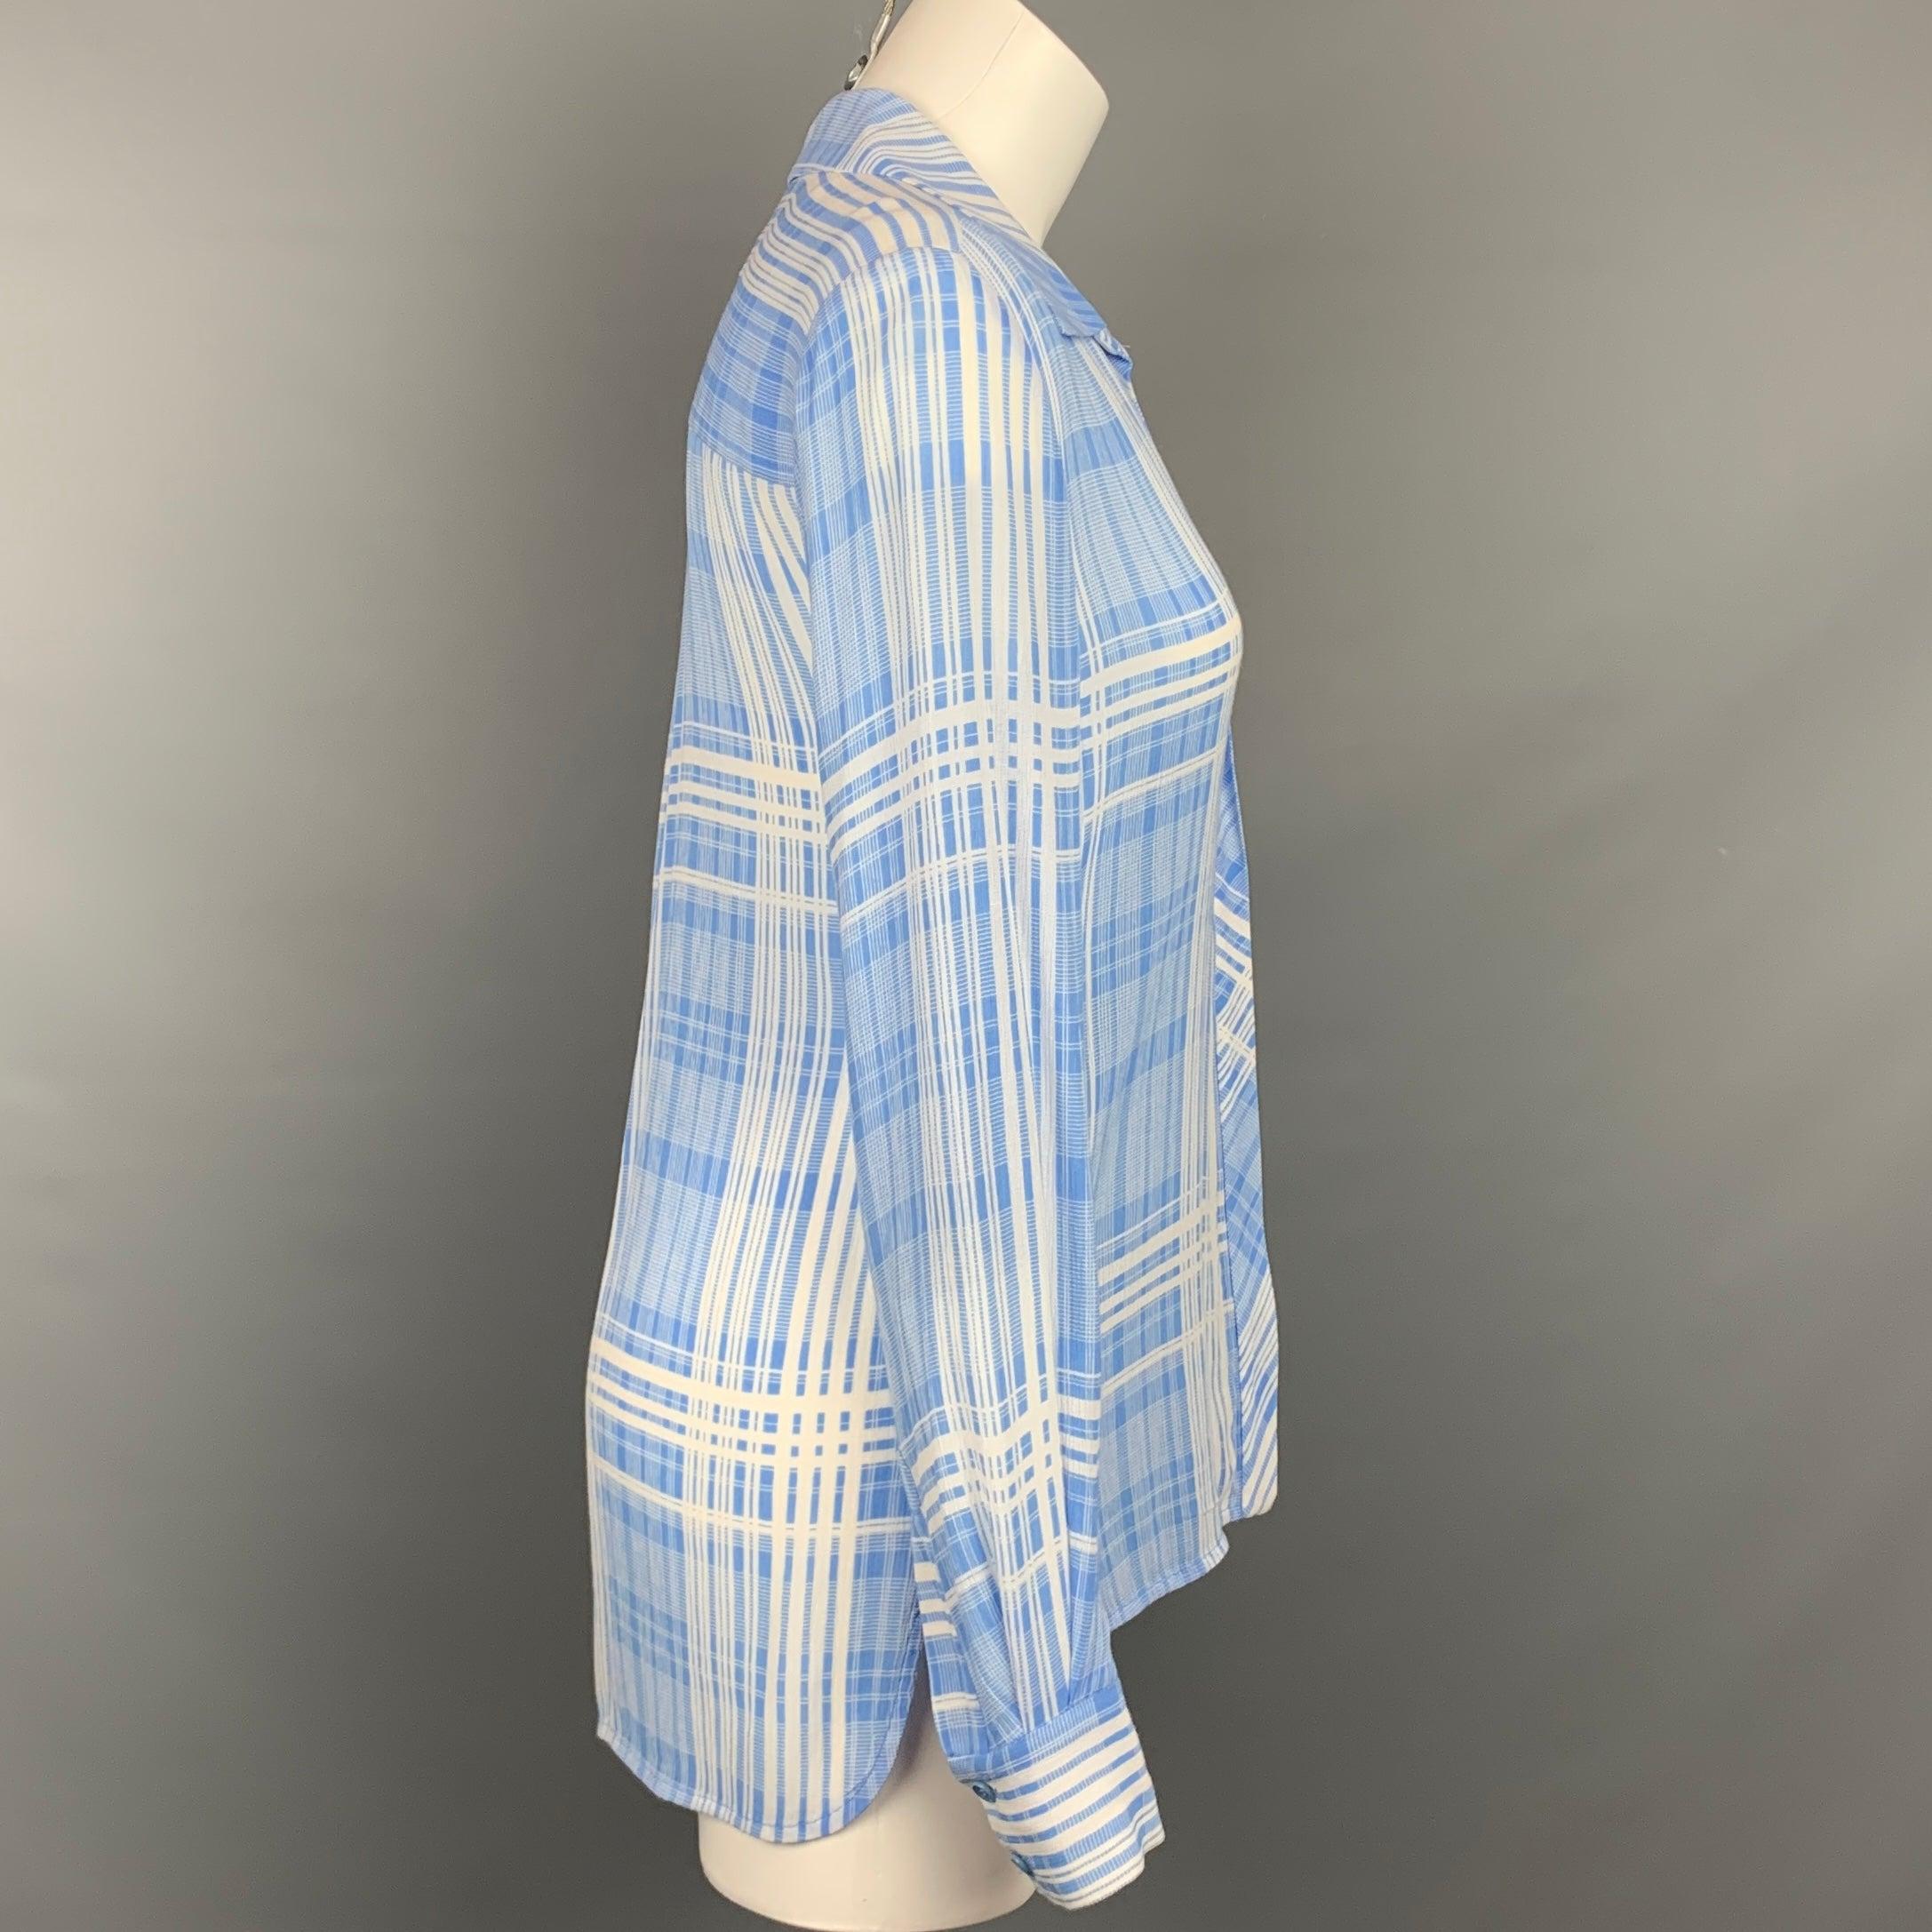 DIANE VON FURSTENBERG blouse comes in a light blue 7 white plaid viscose blend featuring a front pocket, spread collar, loose fit, and a hidden placket closure.
Very Good
Pre-Owned Condition. 

Marked:   2 

Measurements: 
 
Shoulder: 16.5 inches